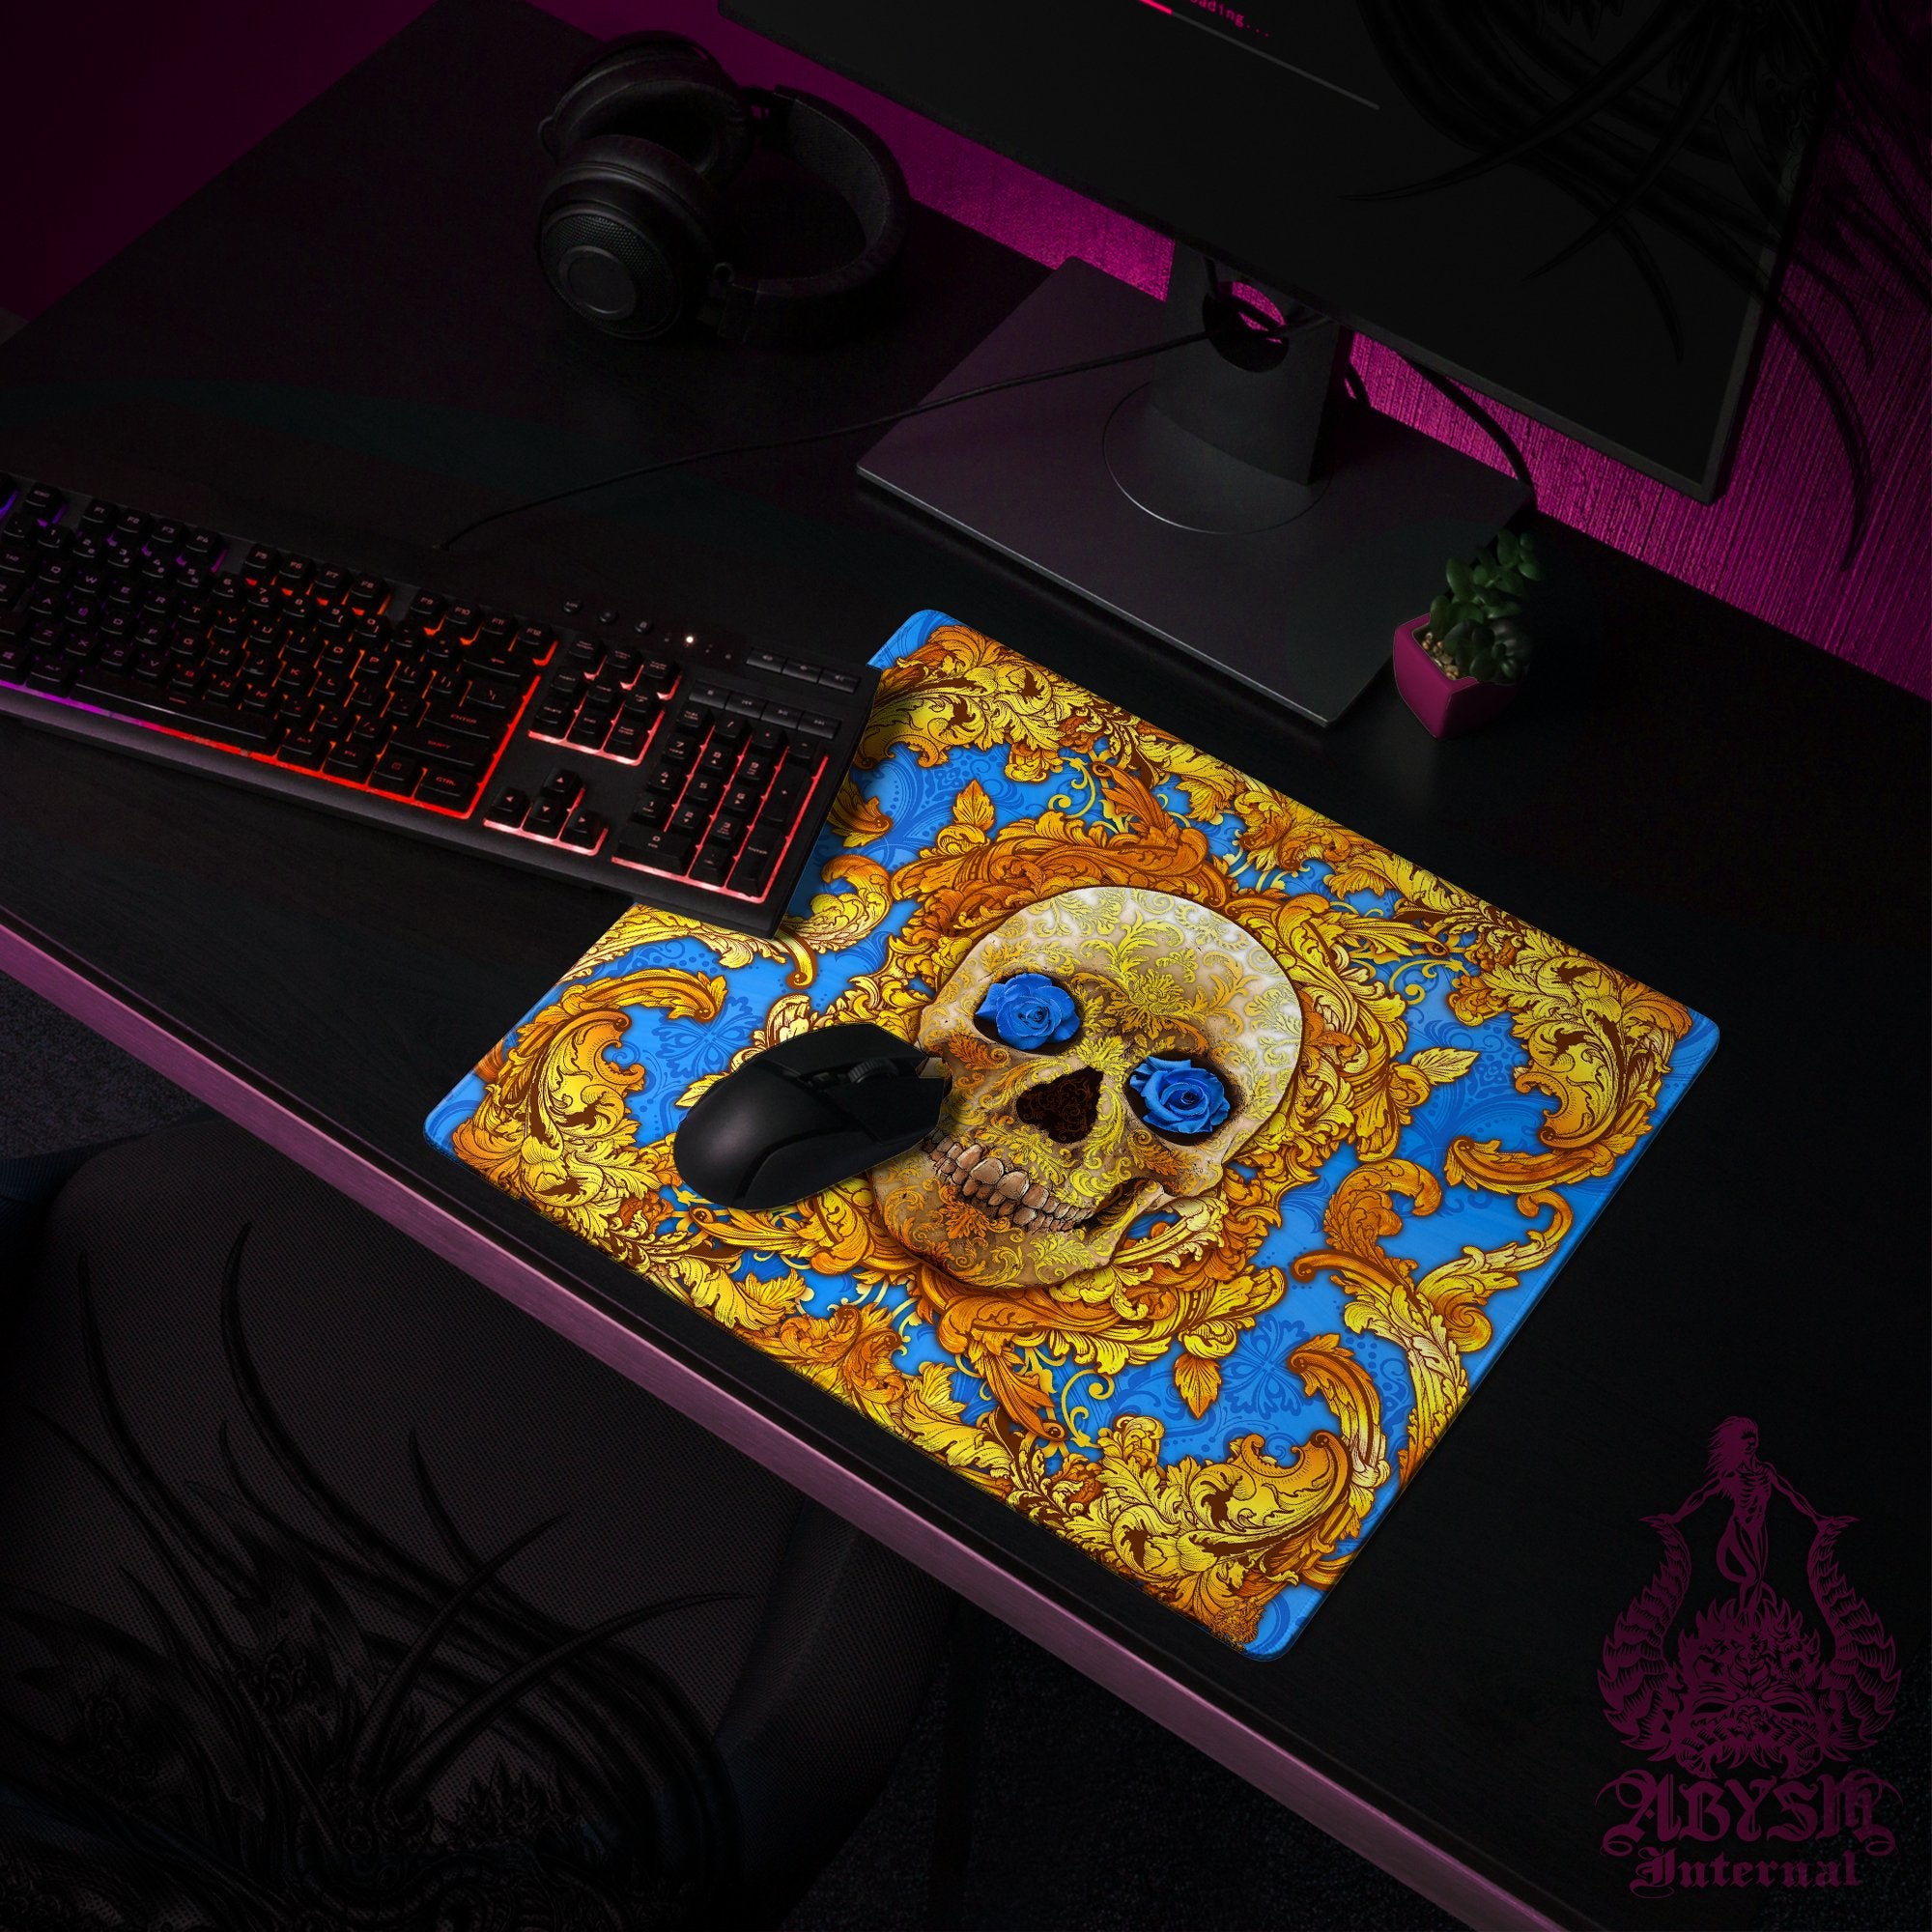 Gold Skull Desk Mat, Cyan Gaming Mouse Pad, Baroque Table Protector Cover, Blue Roses Workpad, Ornamented Art Print - Abysm Internal